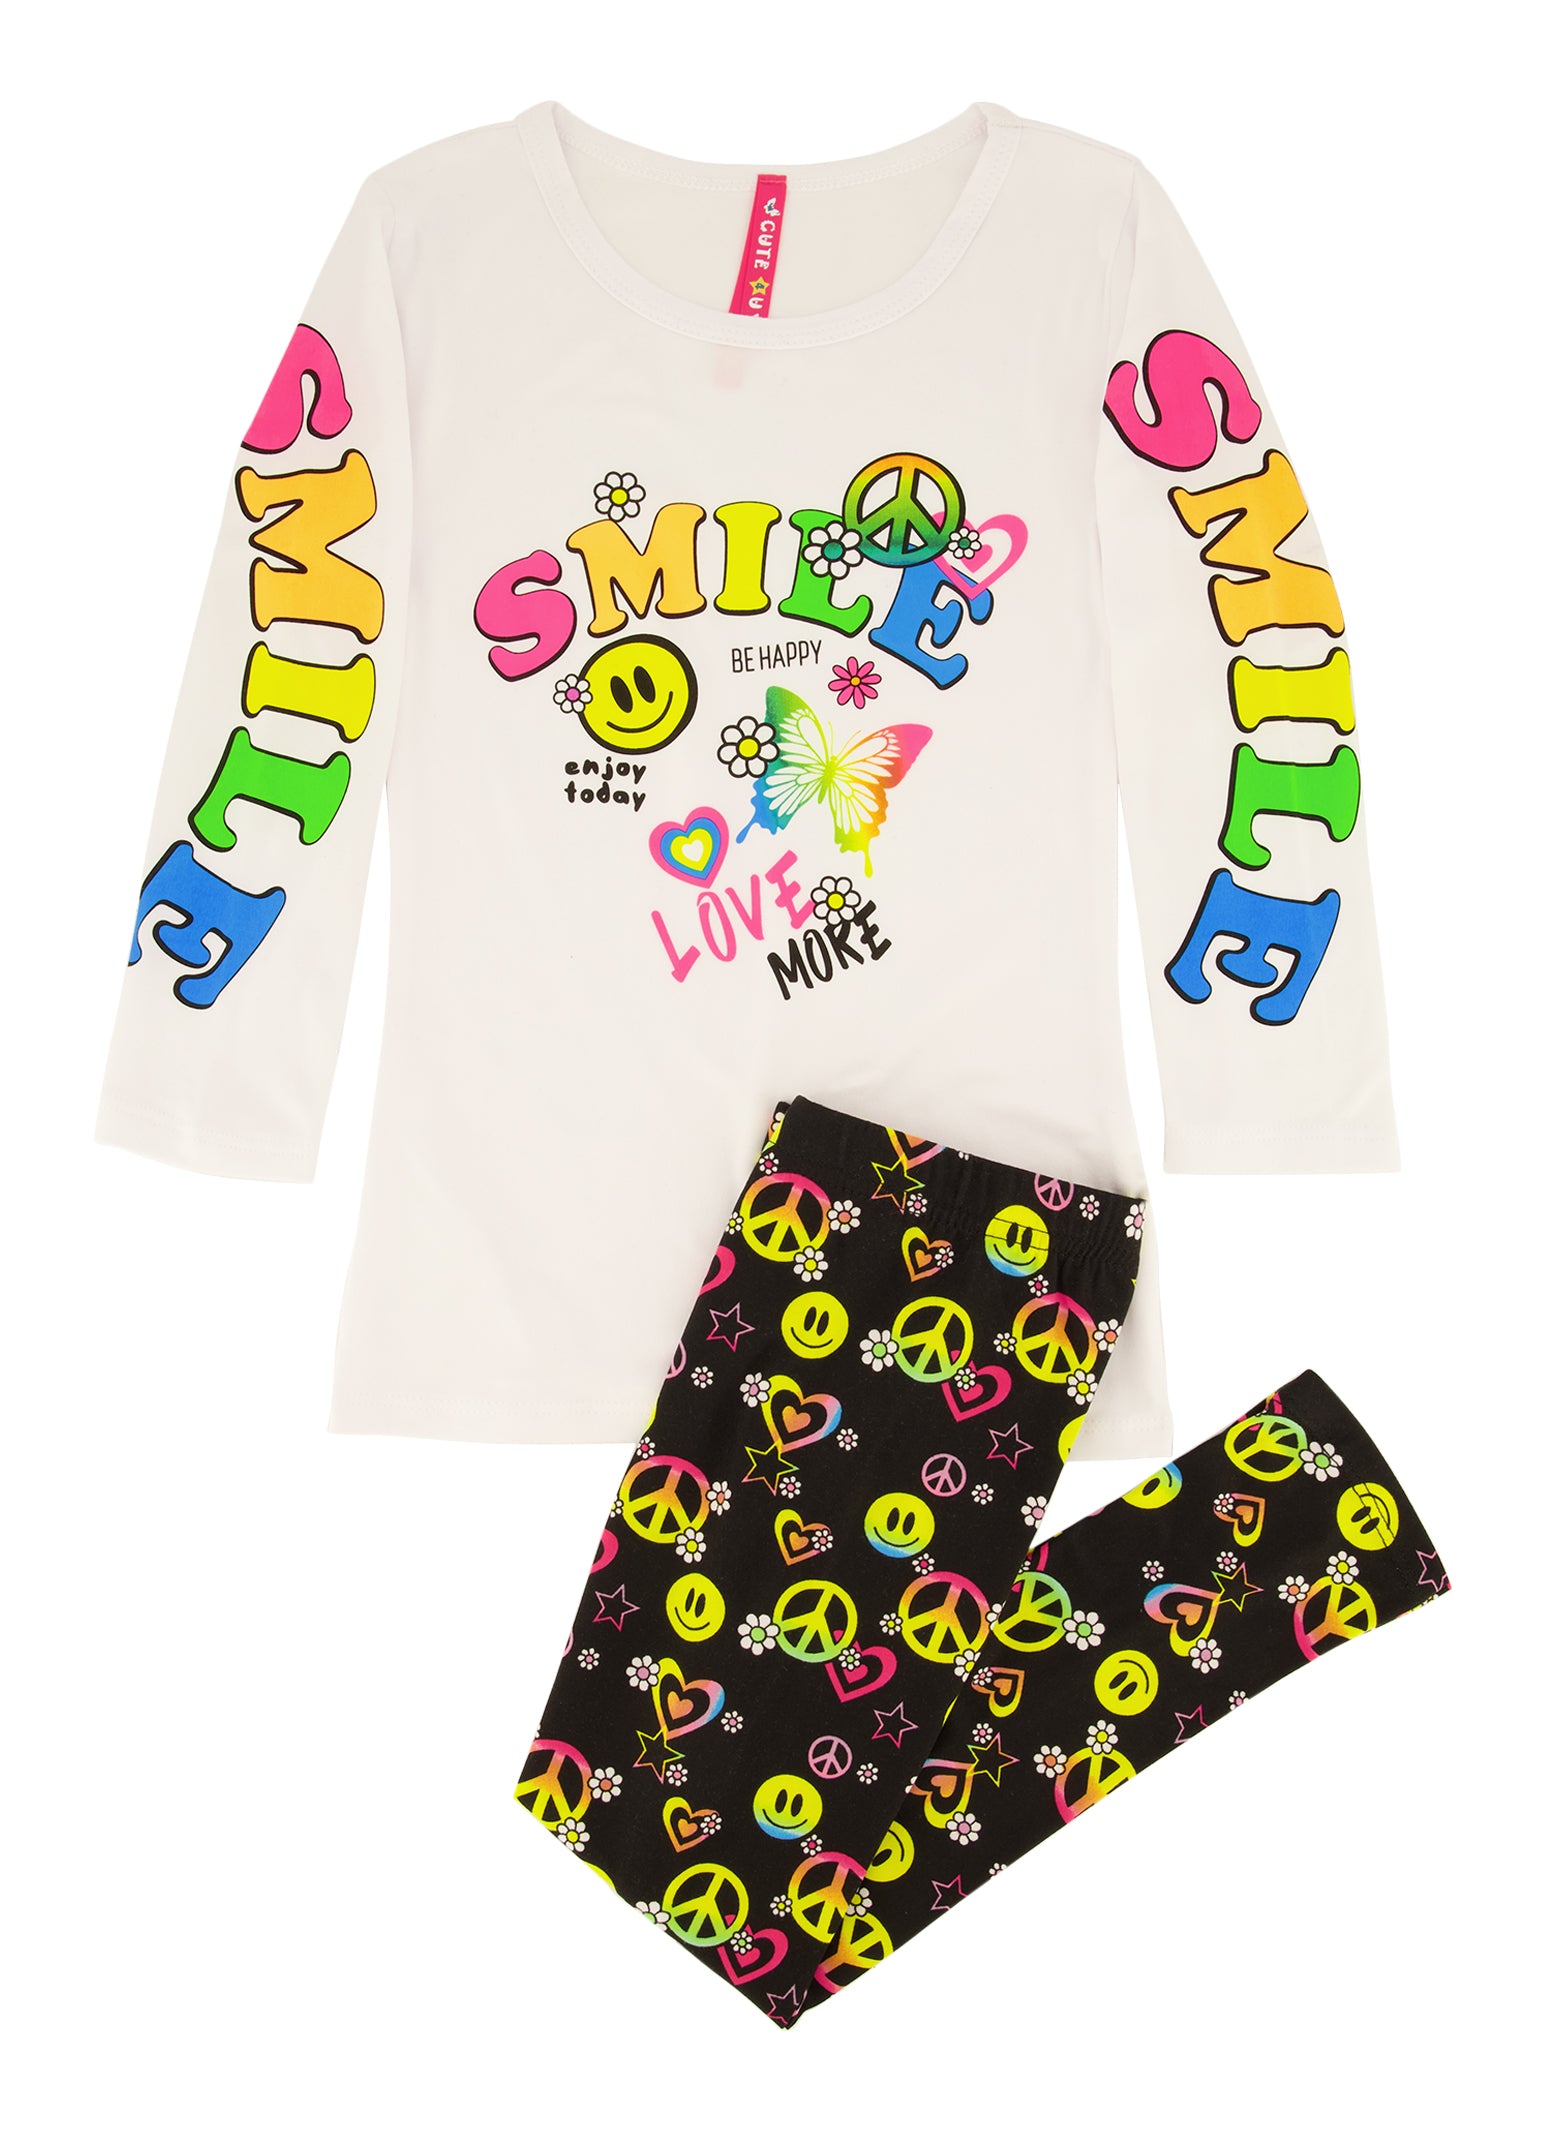 Little Girls Smile Smiley Graphic Print Top and Leggings Set, White, Size 6X